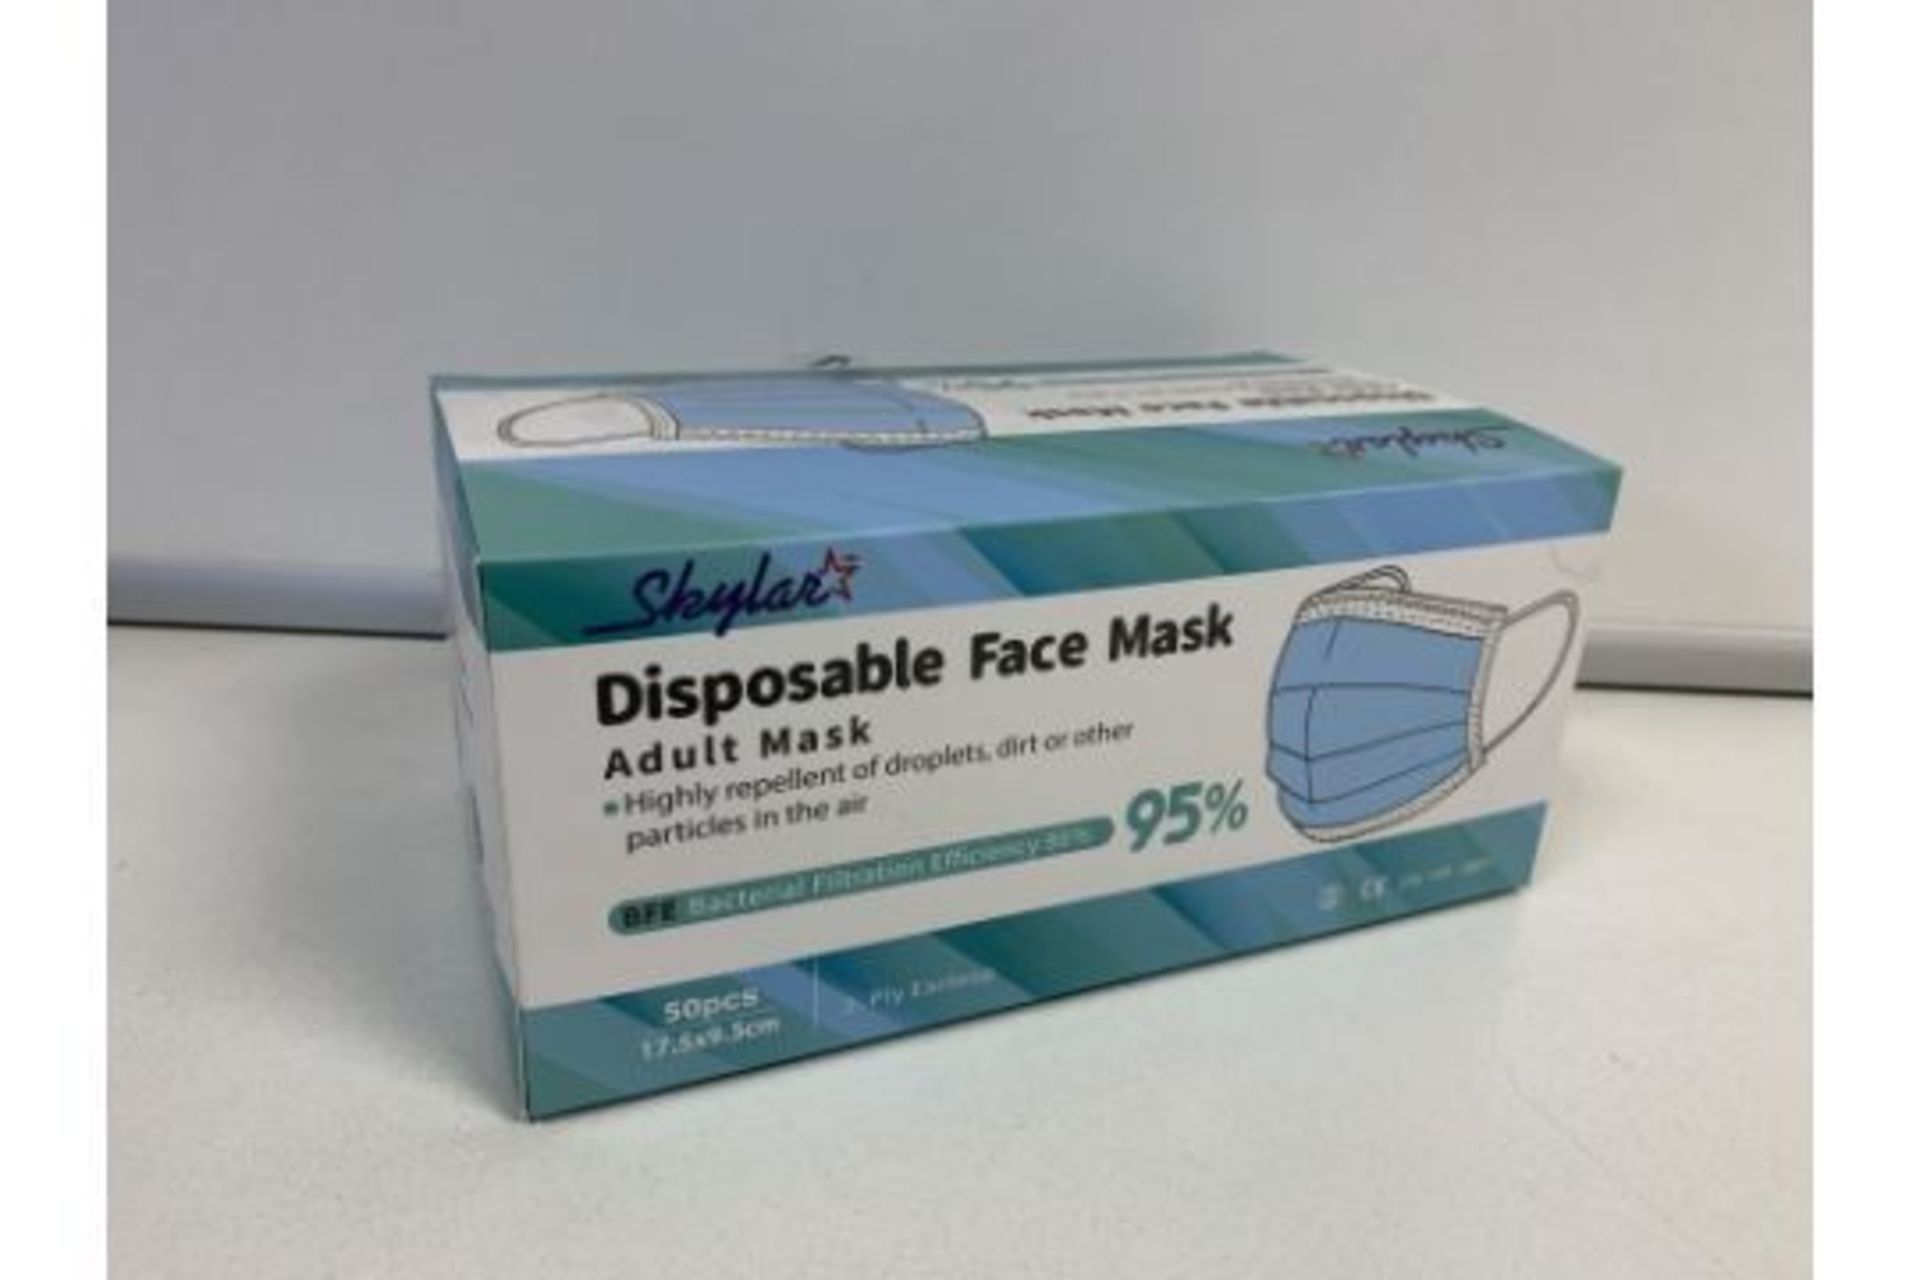 6 X BOXES OF 50 ADULT 3 PLY DISPOSABLE FACE MASKS ( 300 MASKS IN TOTAL ) (1004/30)